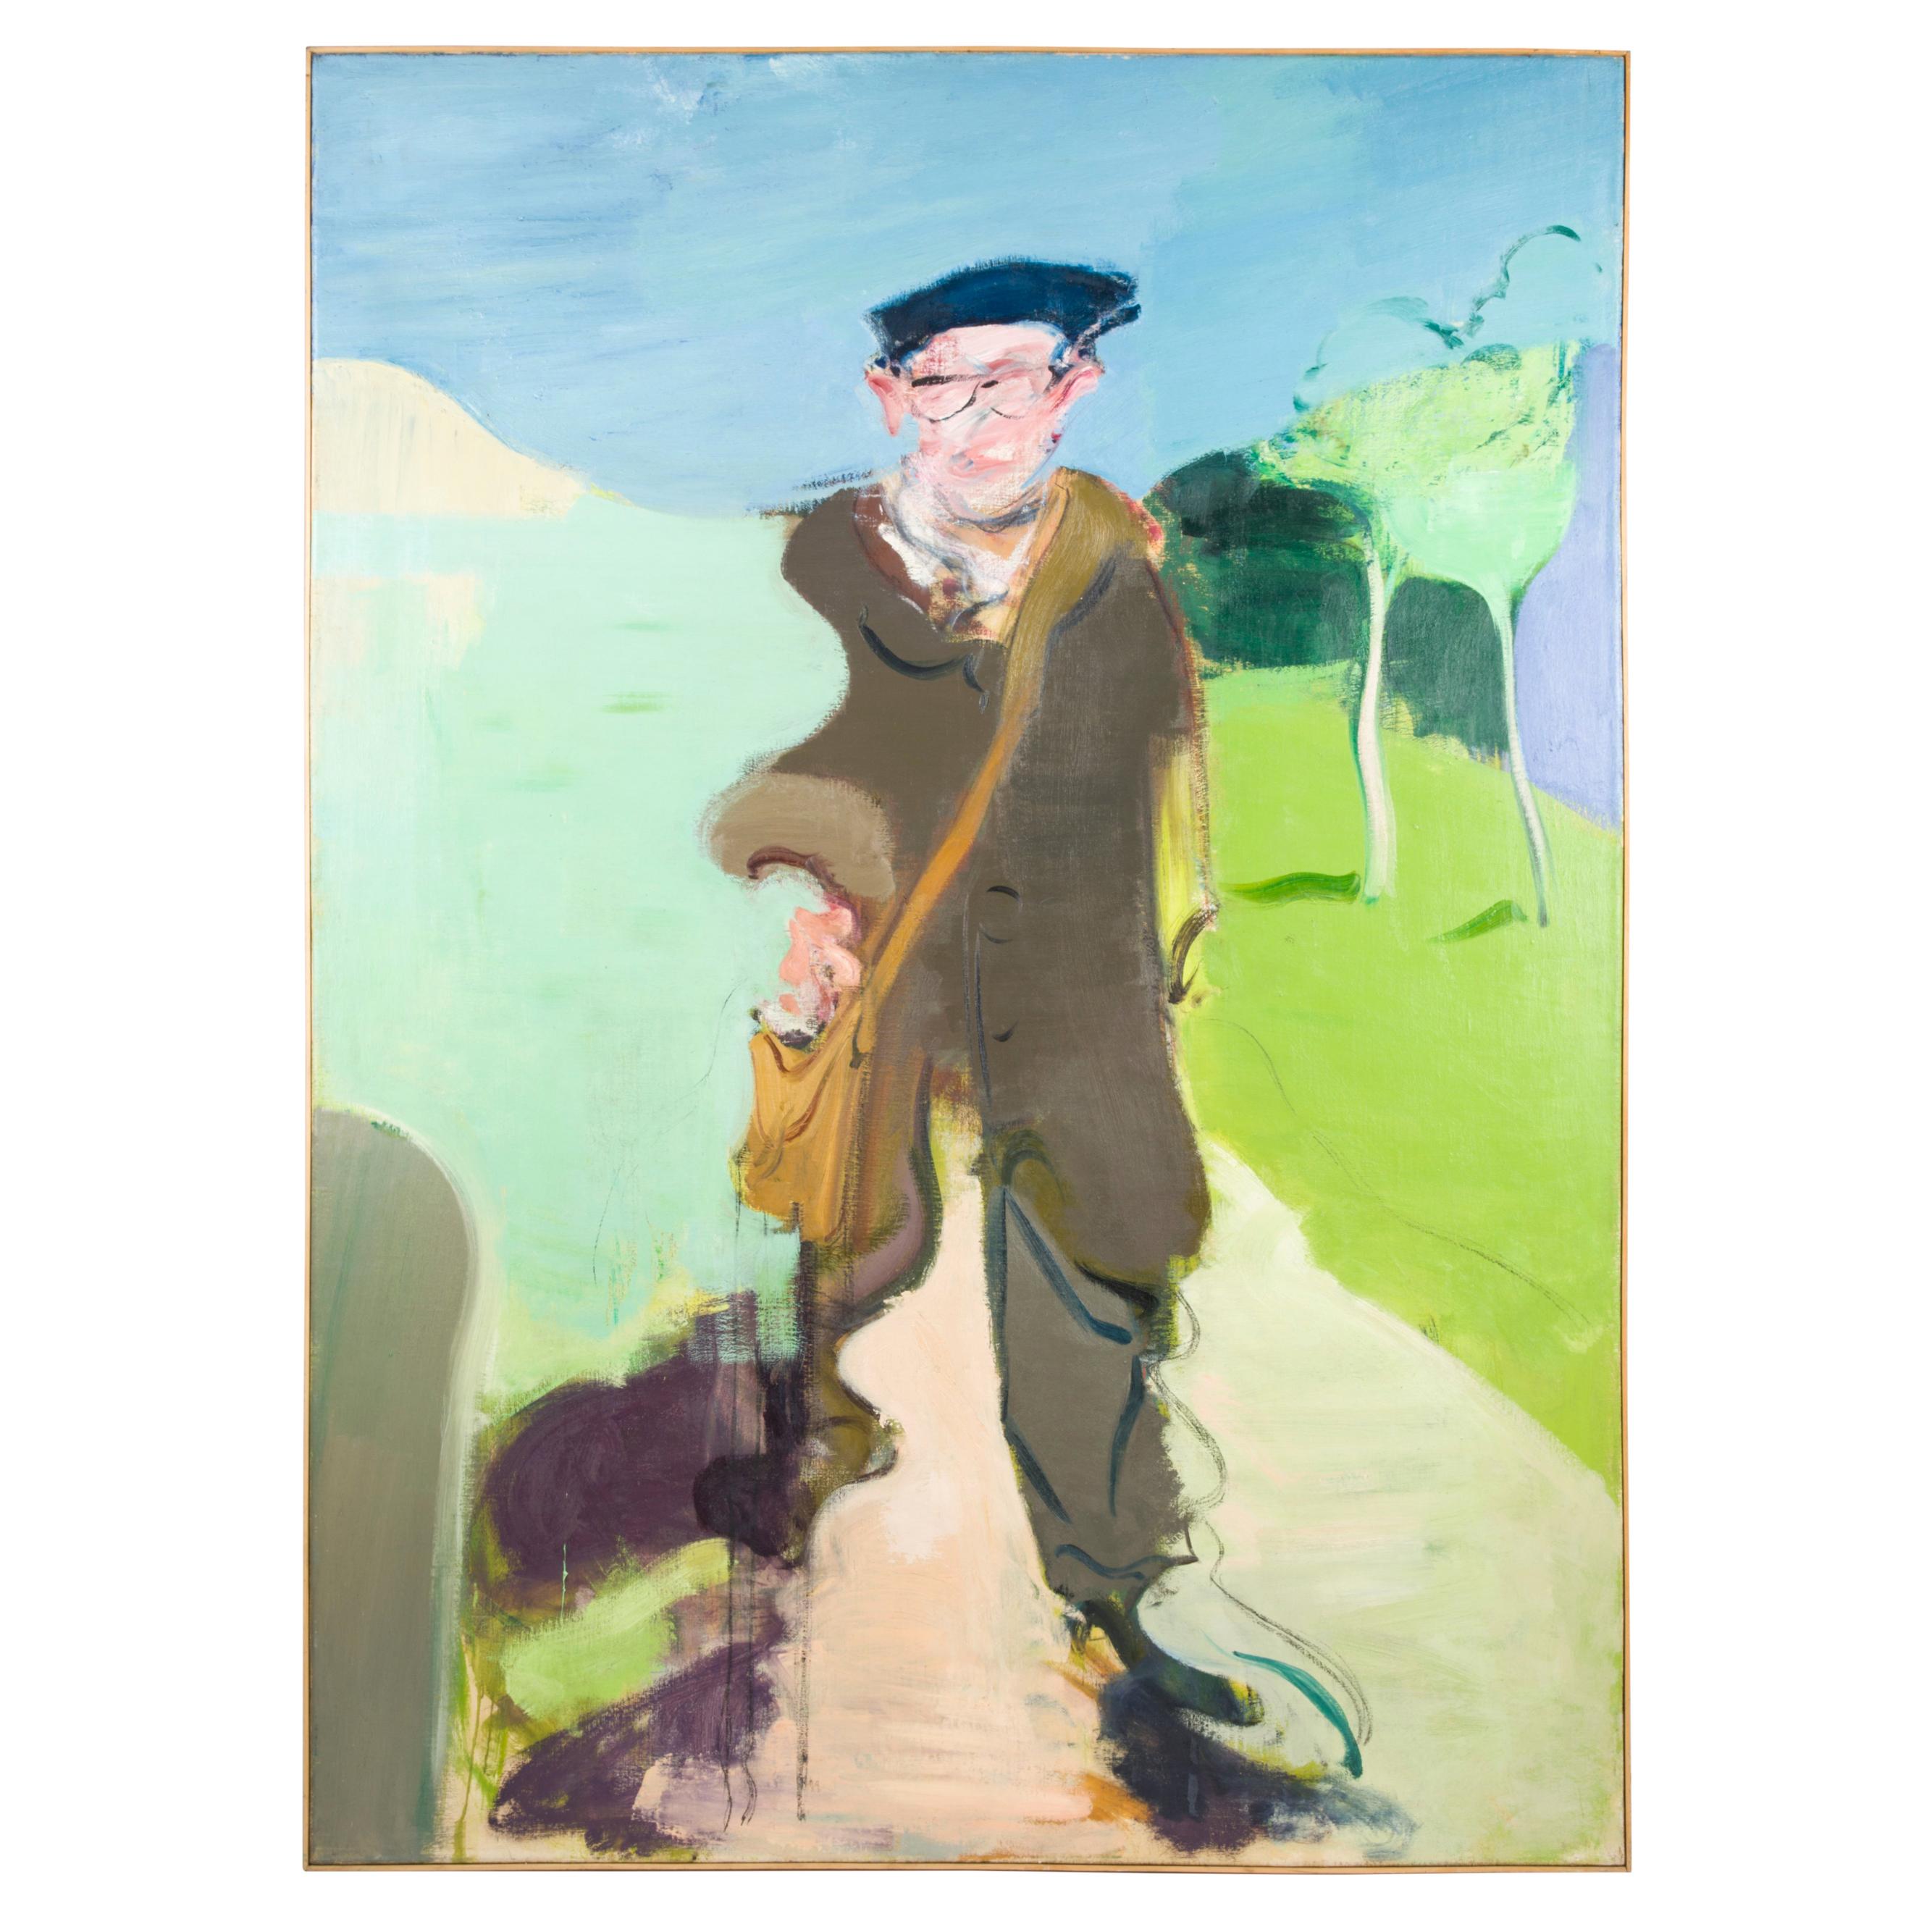 Nicholas Volley, 'Man in Downhills Park' For Sale